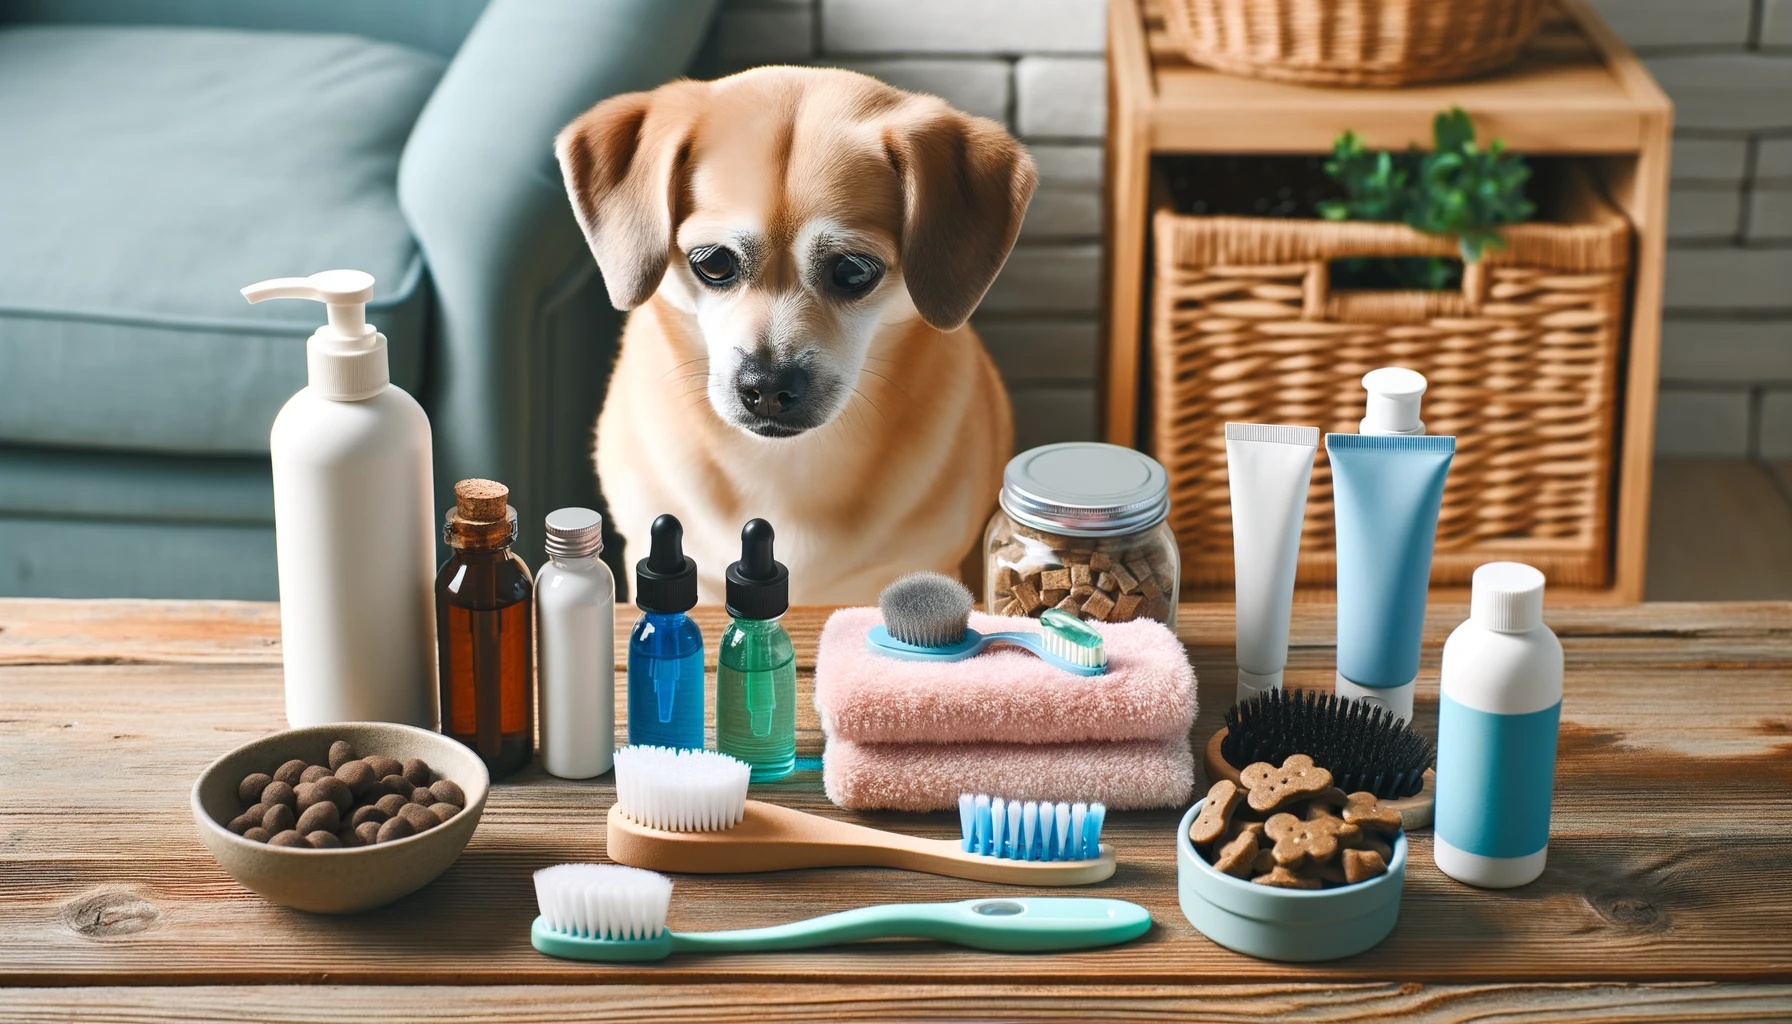 A collection of wellness items like brushes, doggy toothpaste, and healthy treats perfect for a Labrahuahua's grooming and health regimen